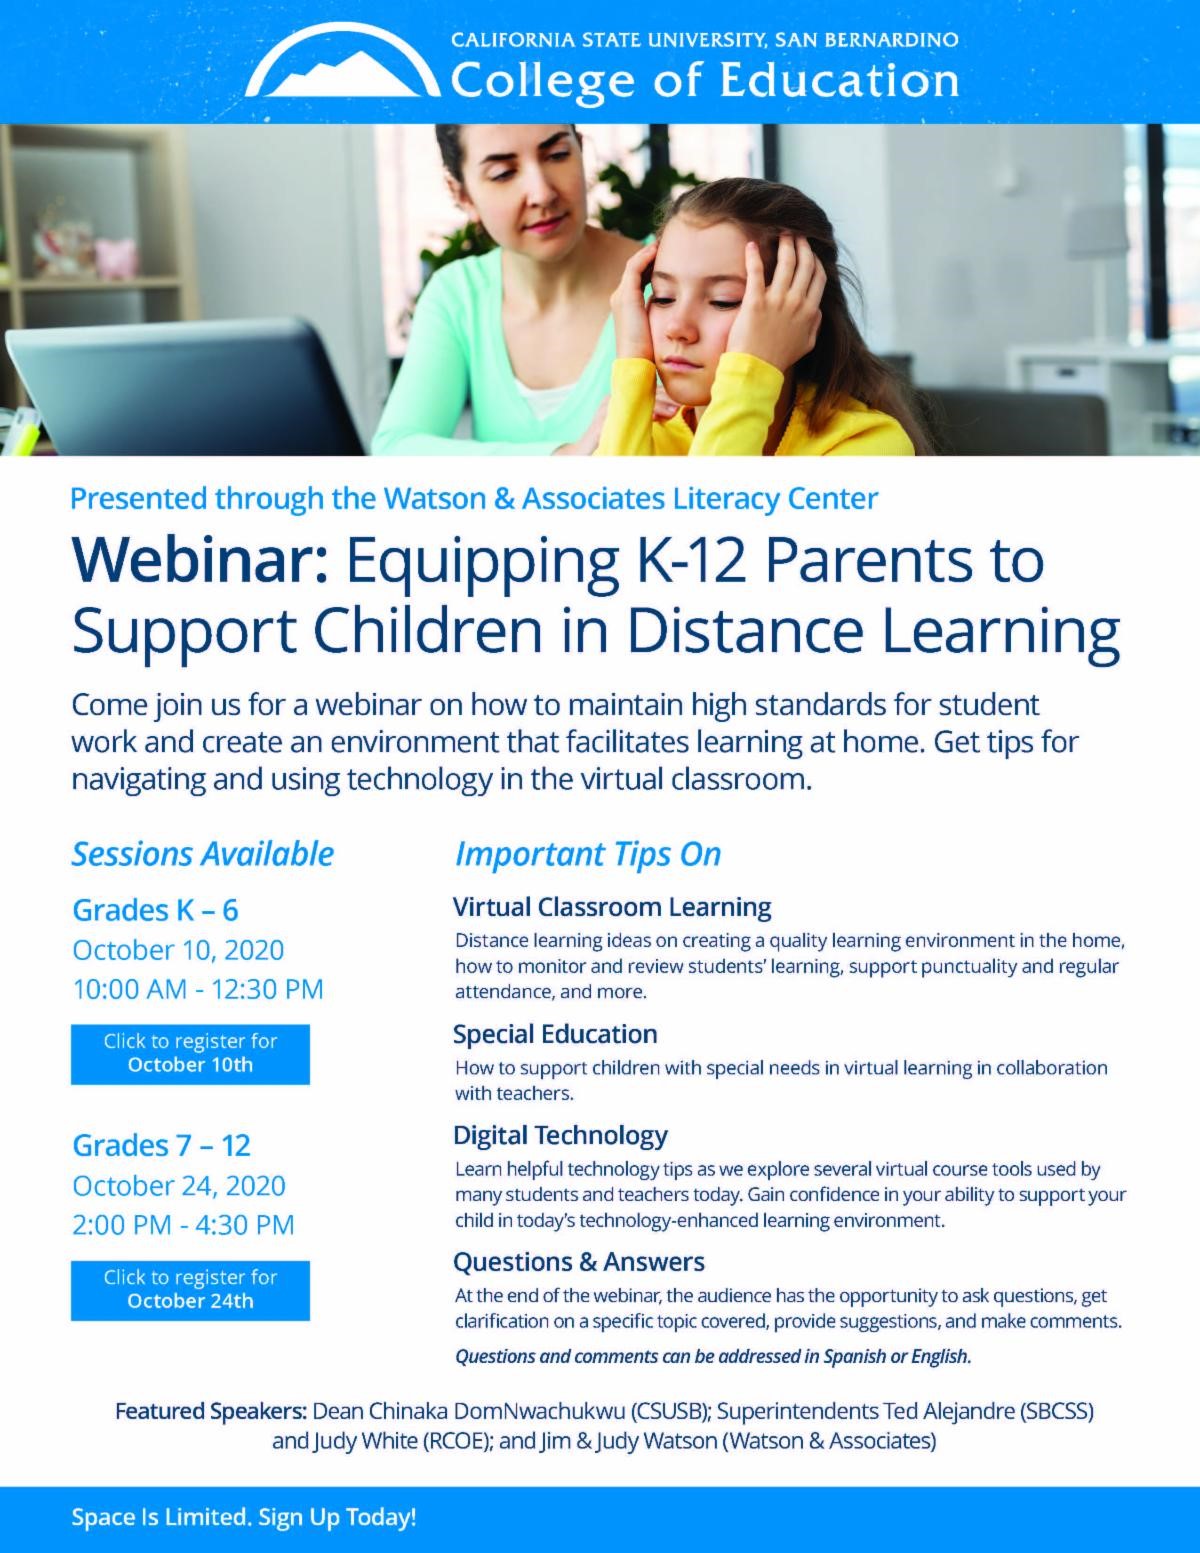 Equipping K-12 Parents to Support Children in Distance Learning